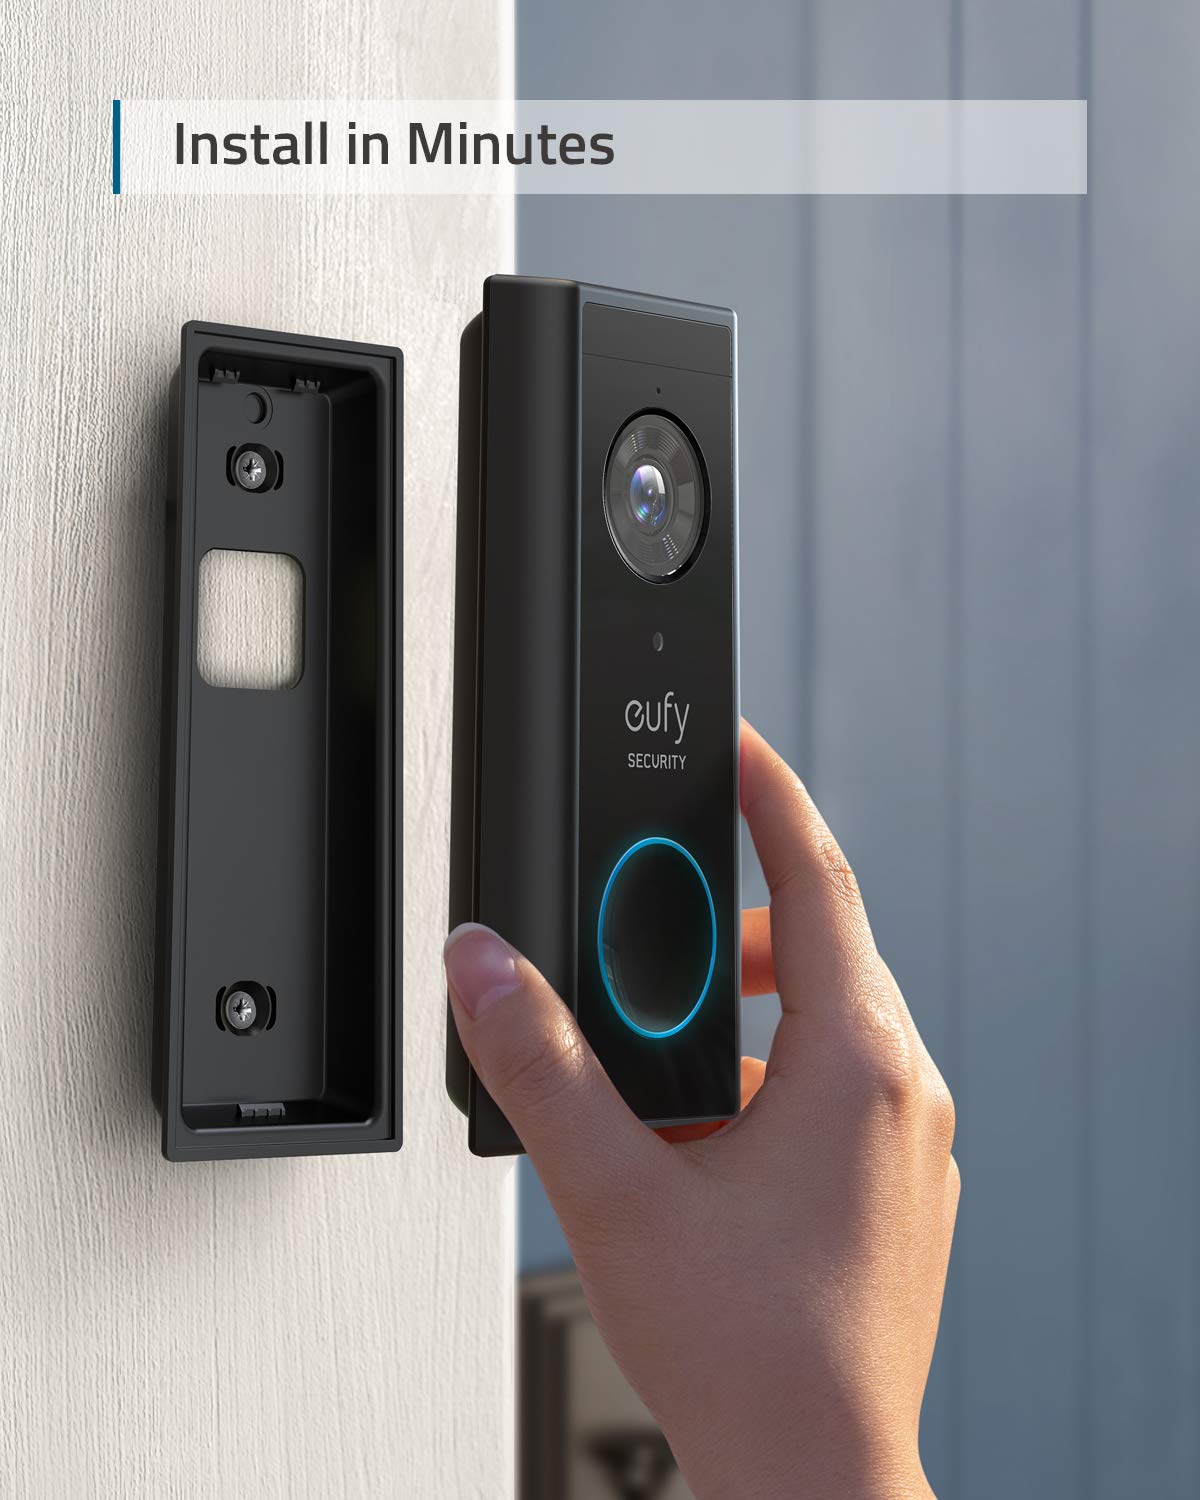 eufy Security, Video Doorbell S220 (Battery-Powered) Kit, Security Camera - 2K Resolution, 180-Day Battery Life, Encrypted Local Storage, No Monthly Fees, Built-in Storage, Motion Only Alert